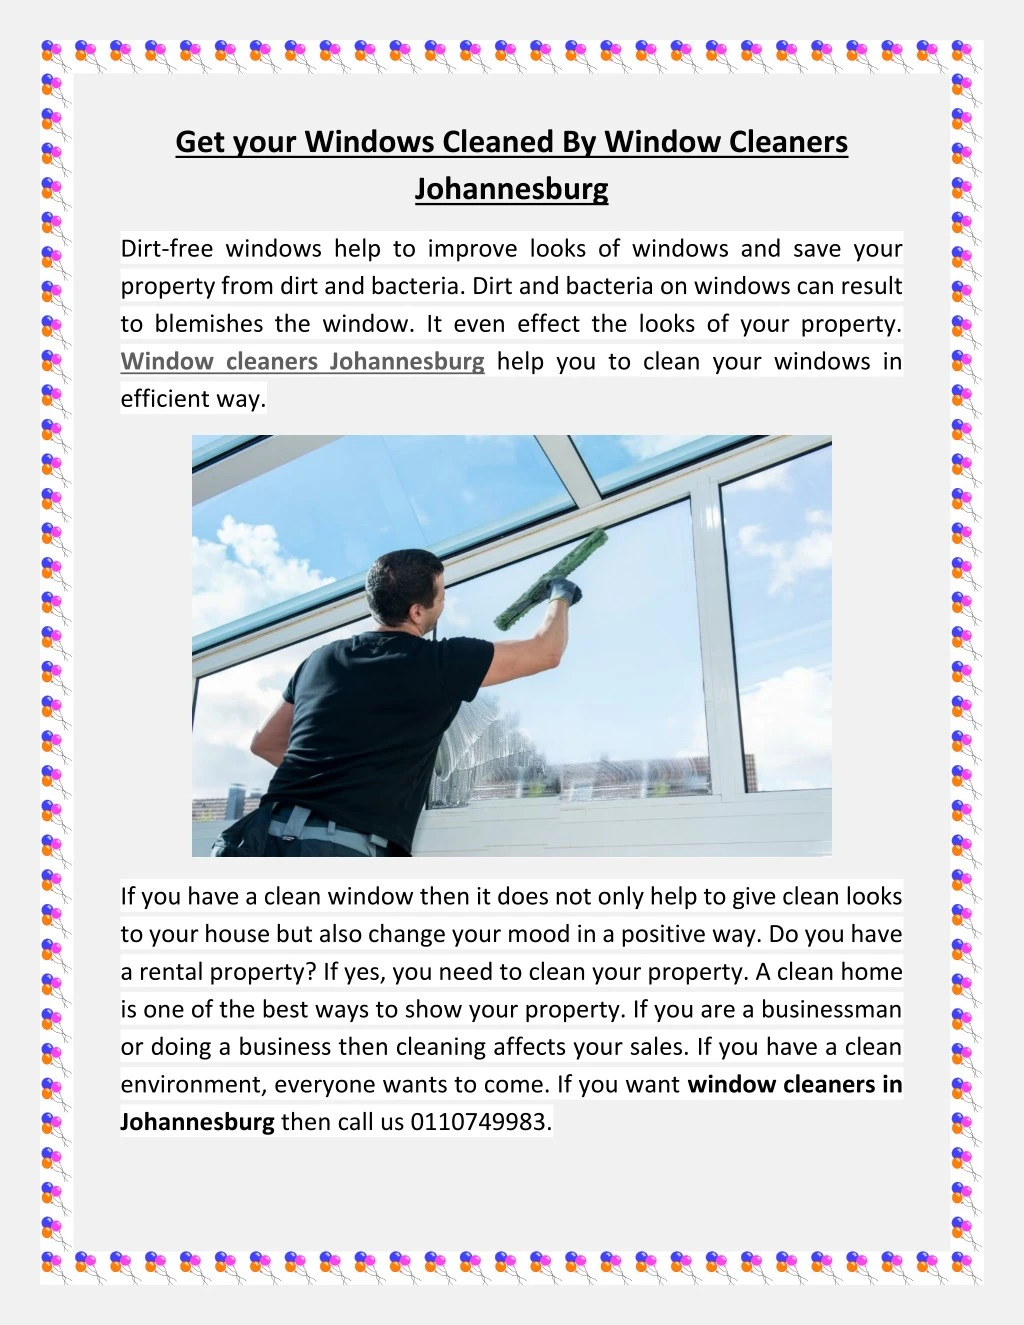 get your windows cleaned by window cleaners